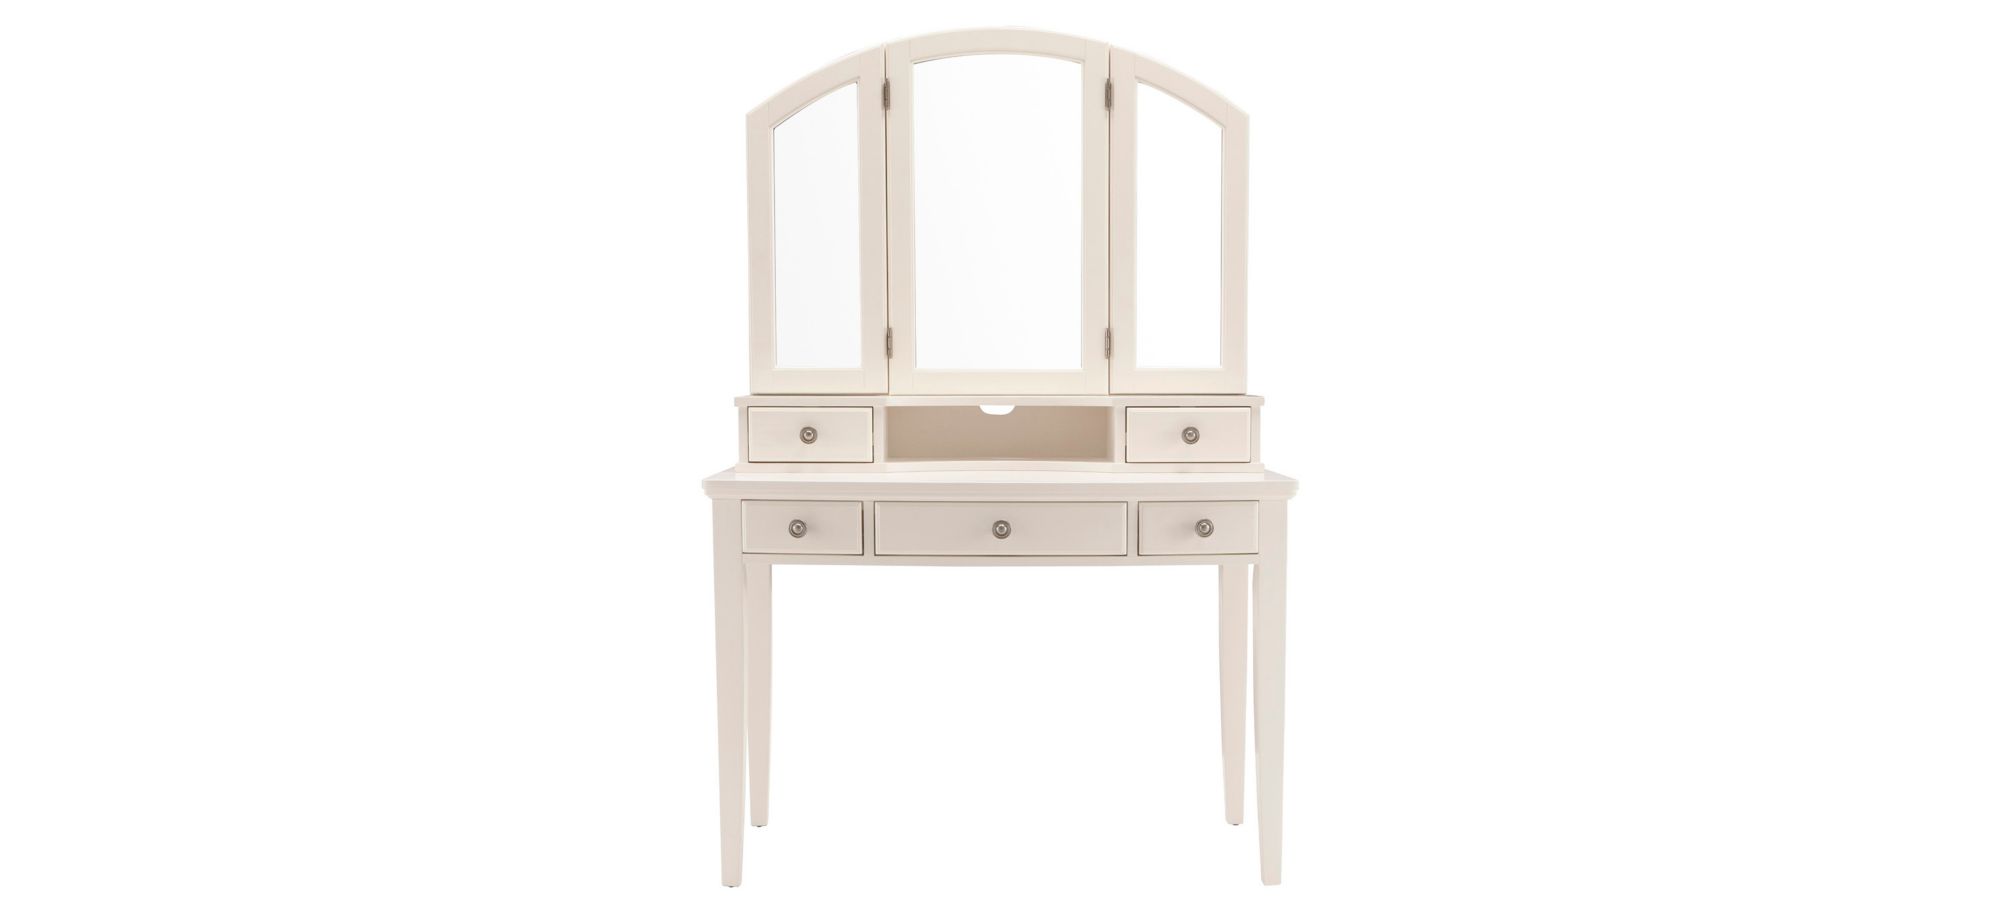 Kylie Youth 2-pc.Vanity Desk and Tri-View Mirror Hutch in Cream by Bellanest